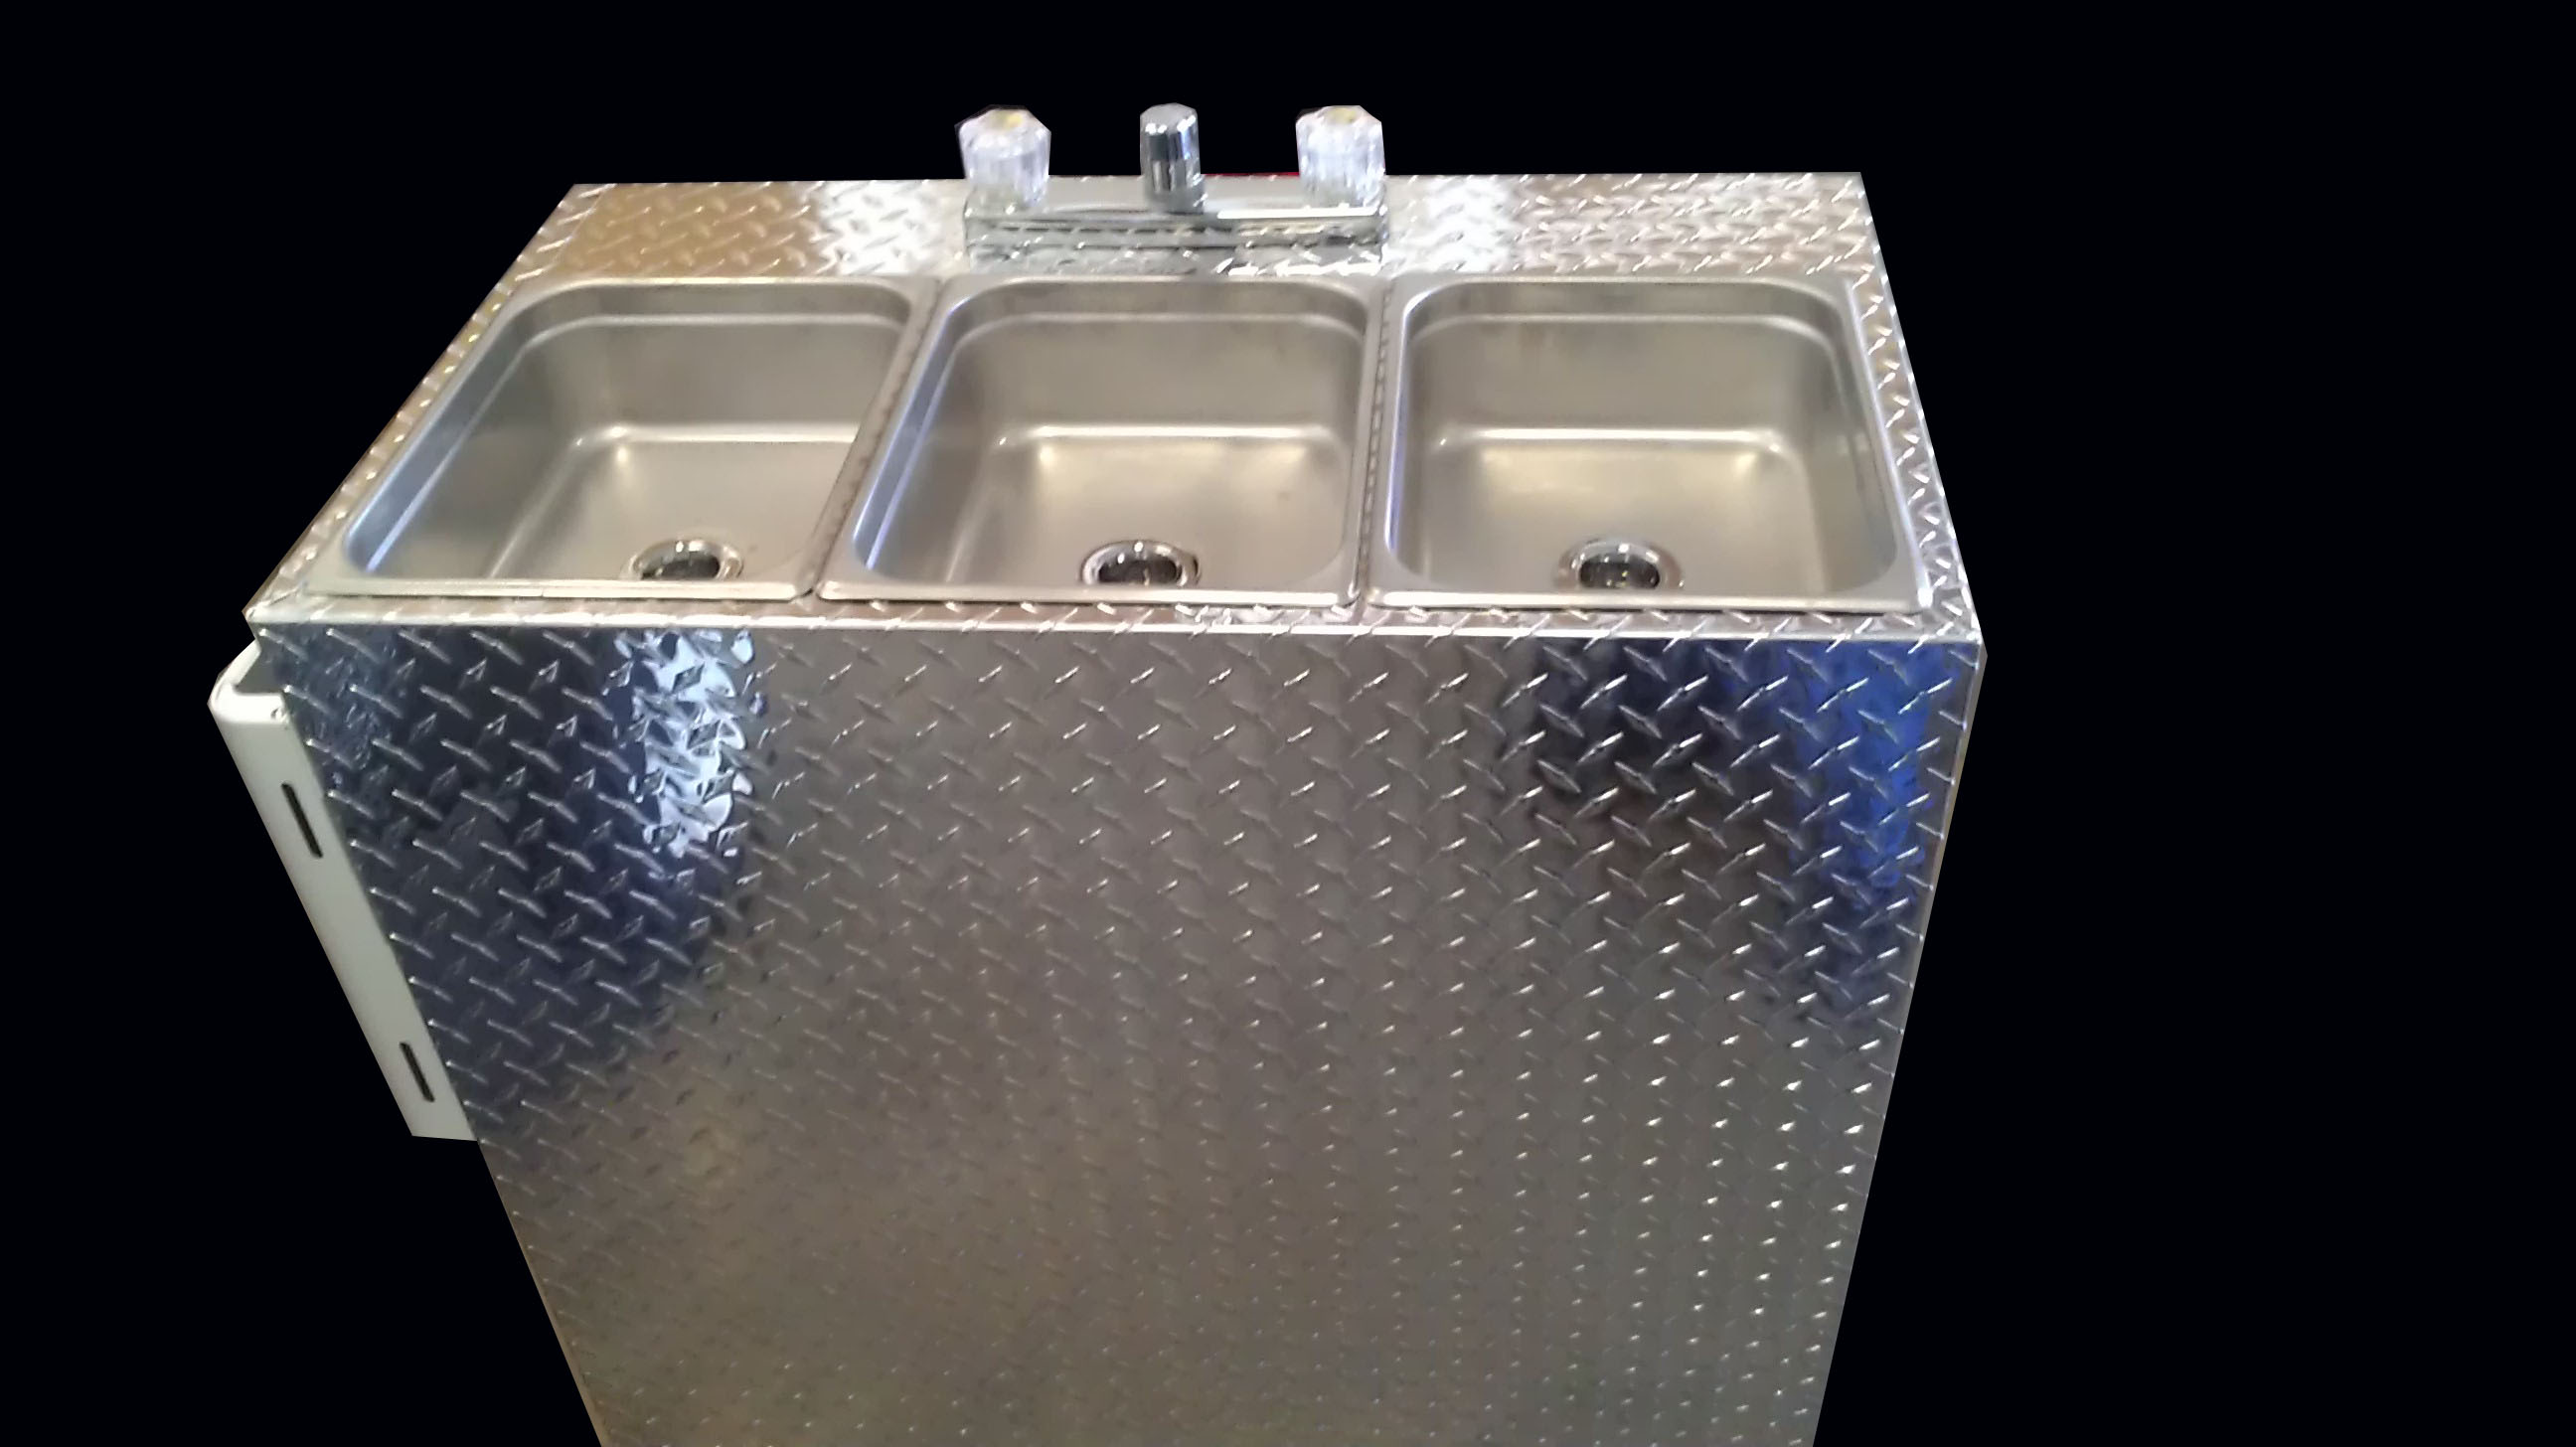 Large 3 Compartment Self Contained Portable Sink 12v Lp Gas Tank Less Hot Water Heater Diamond Plate